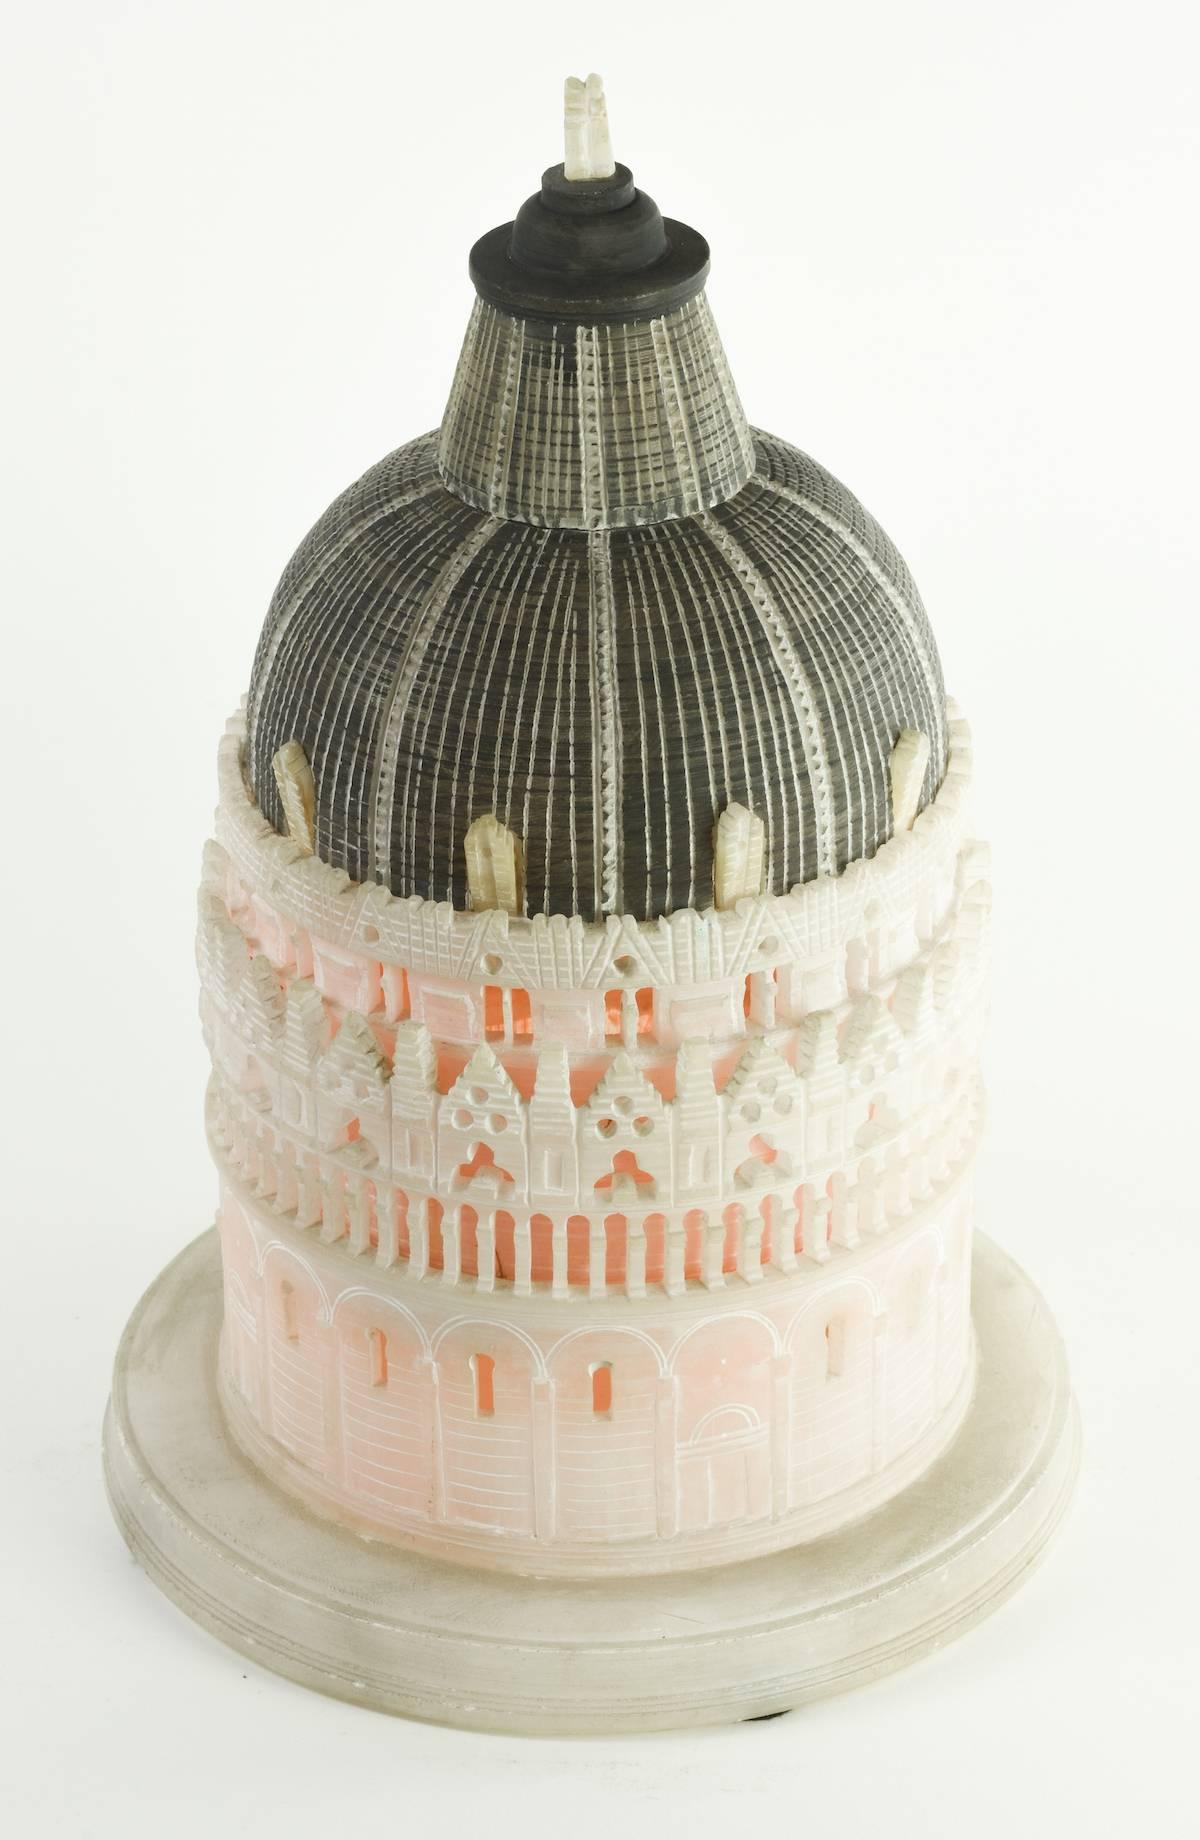 St. John’s Baptistry, Pisa
Alabaster, 12” H. 
Pisa, circa 1890.

With the city of Pisa, in Italy’s northwest, Ligurian coast, our thoughts run to the Tower. In architectural history, never has imperfection provided such celebrity. There are, of